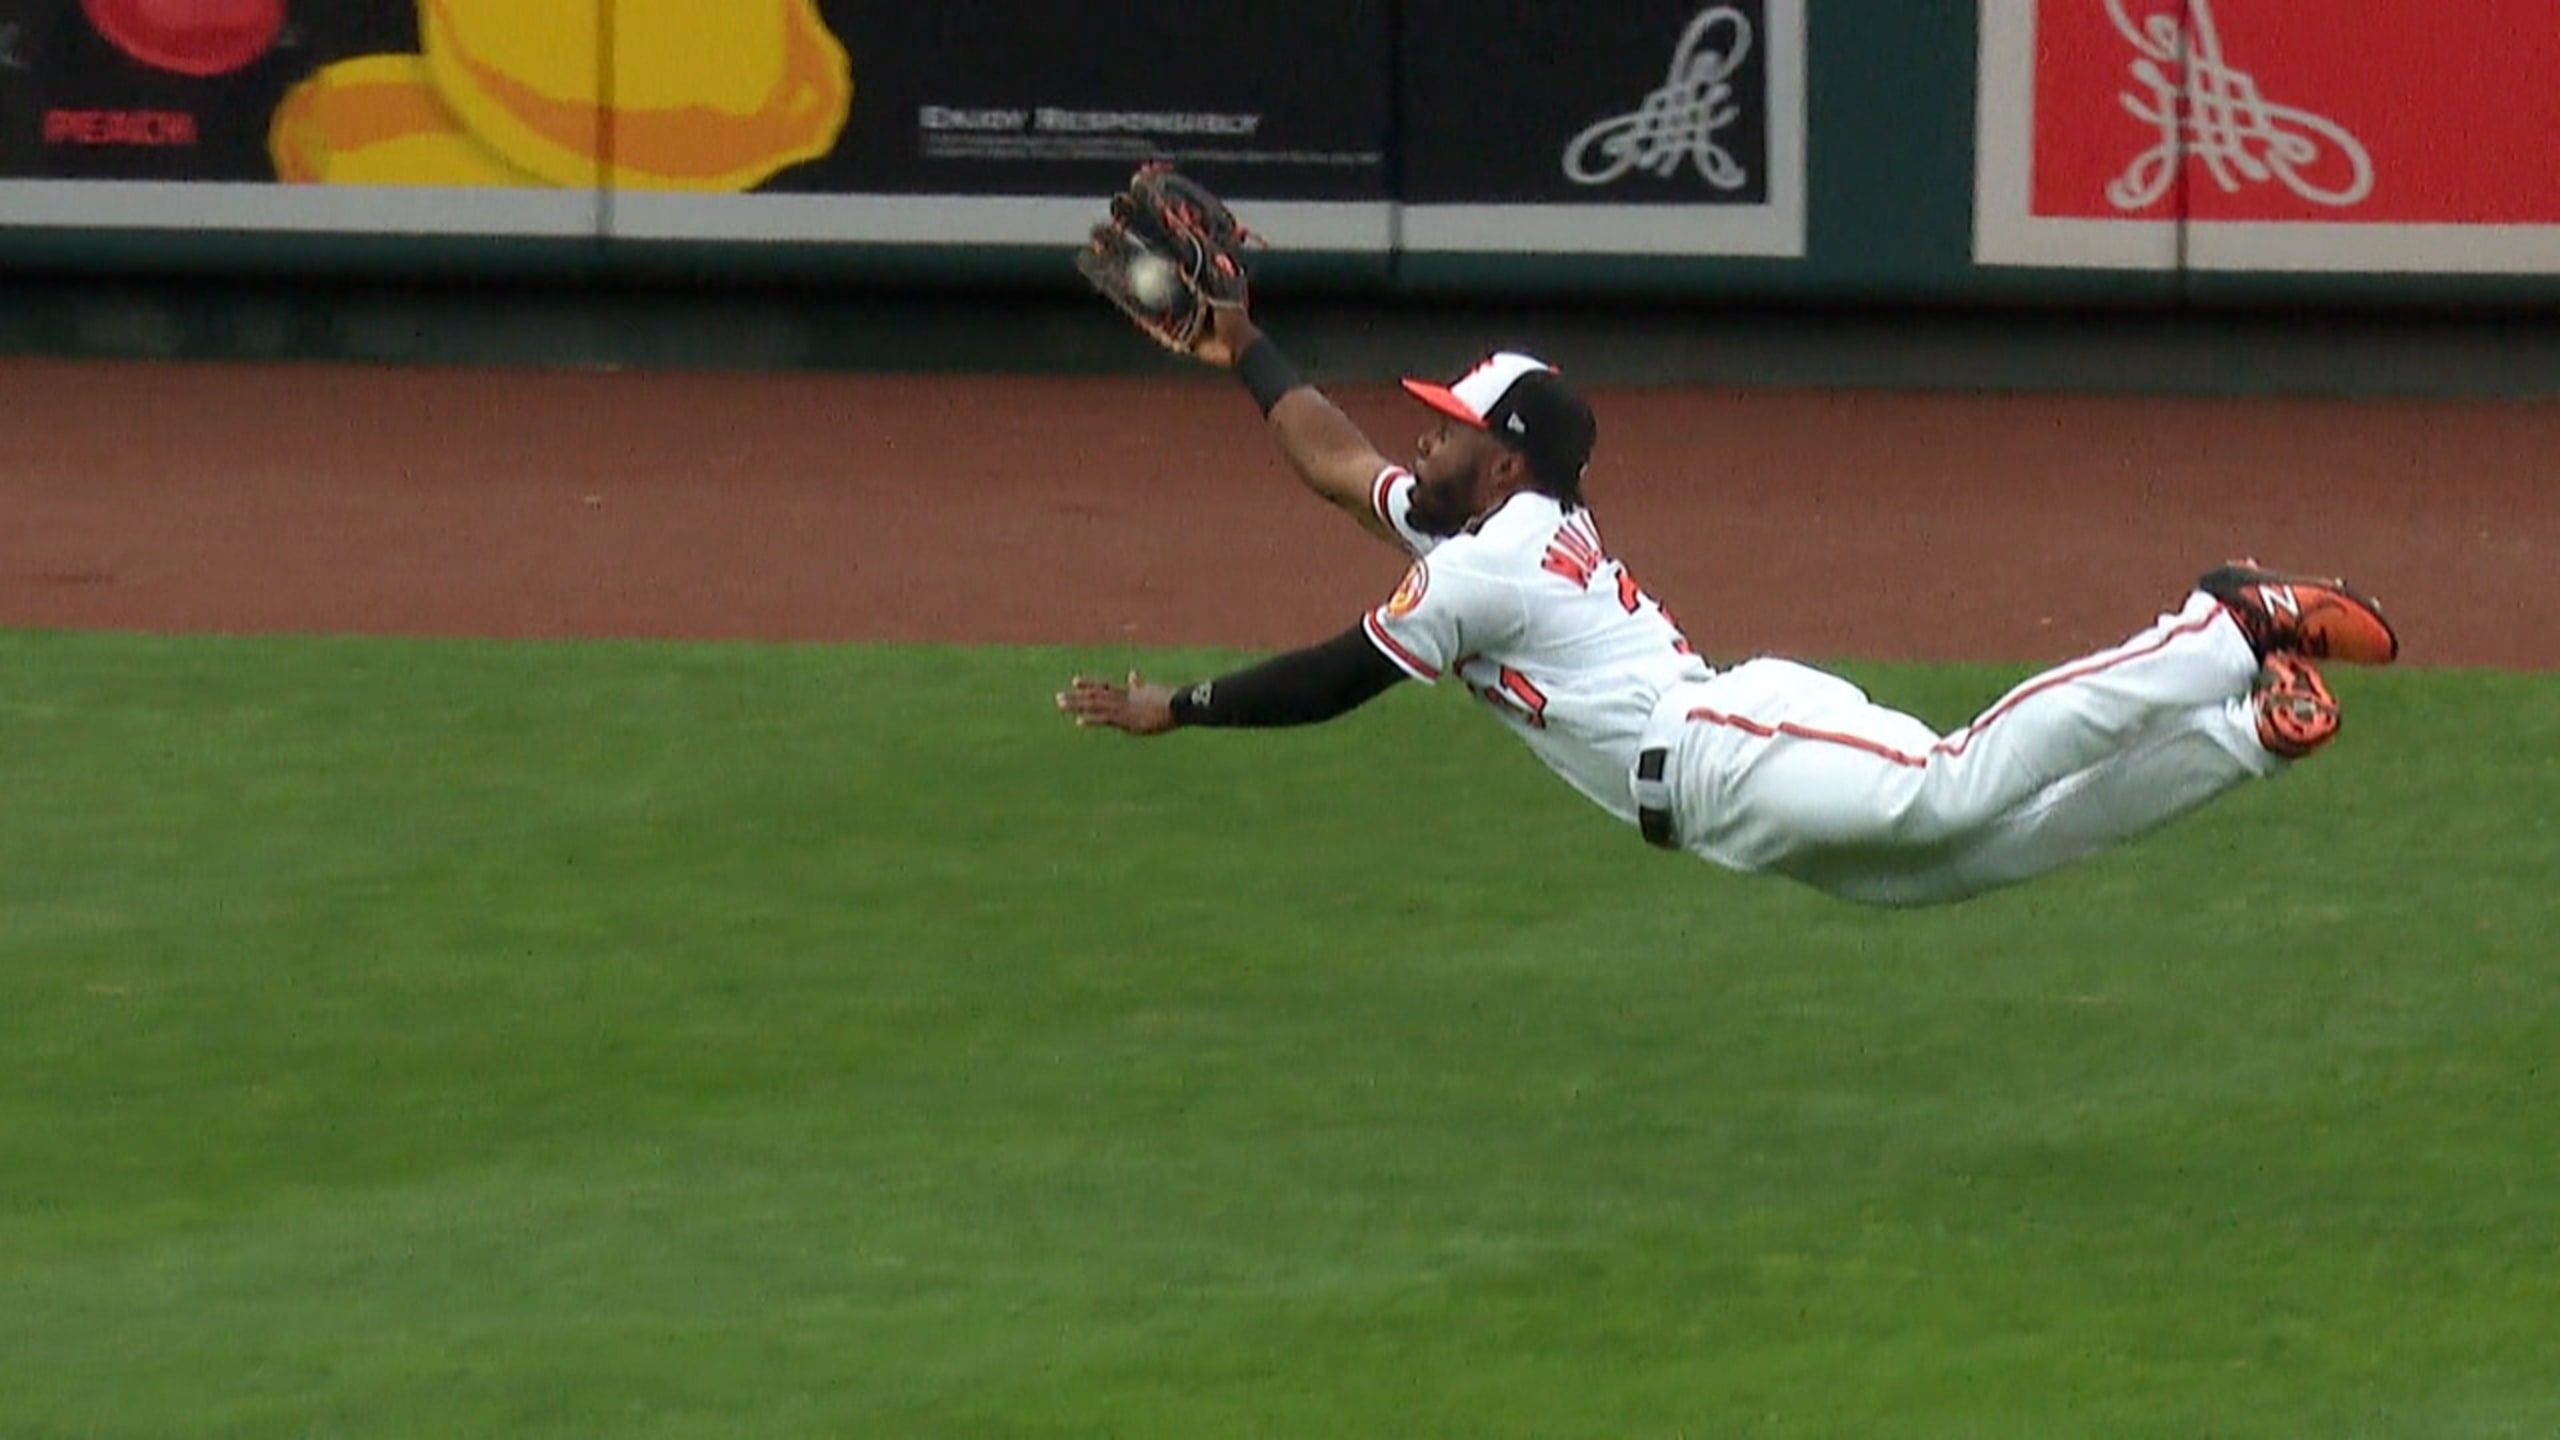 Cedric Mullins Makes Another Amazing Catch - Eutaw Street Report